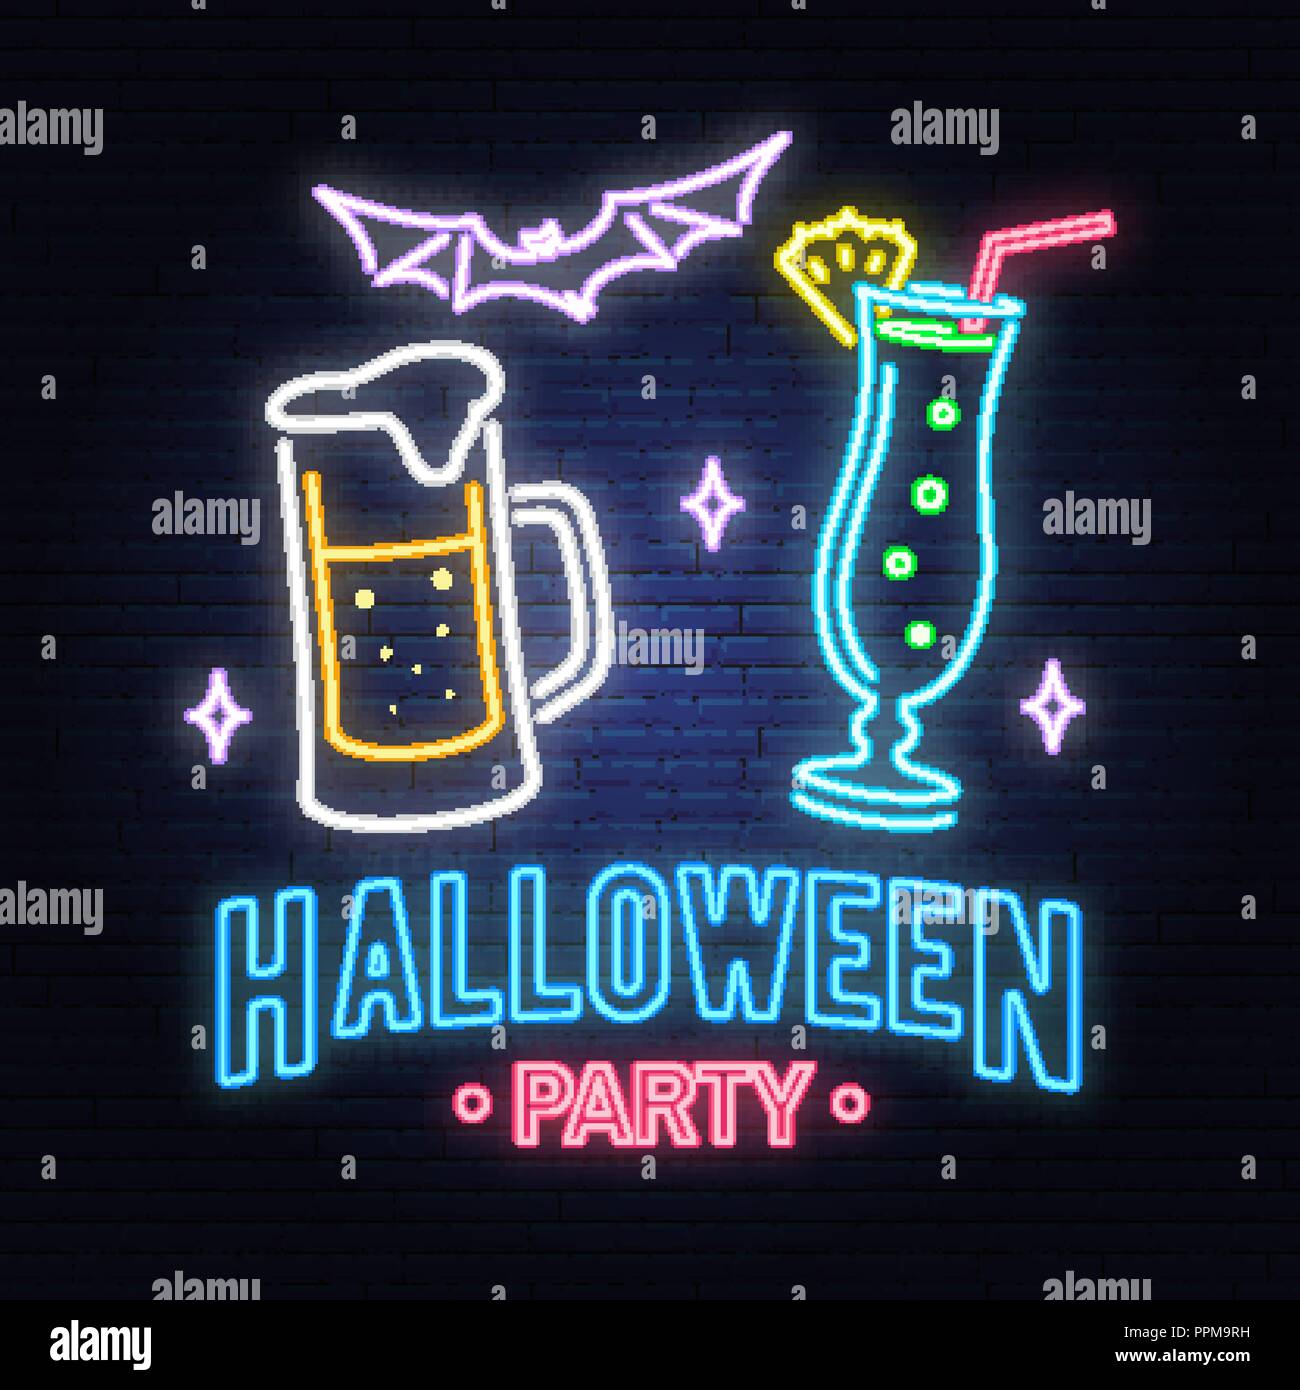 Halloween party neon sign. Vector illustration. Happy Halloween light banner with Beer, cocktail and bat. Night bright advertisement. Neon sign for banner, billboard, promotion or advertisement. Stock Vector